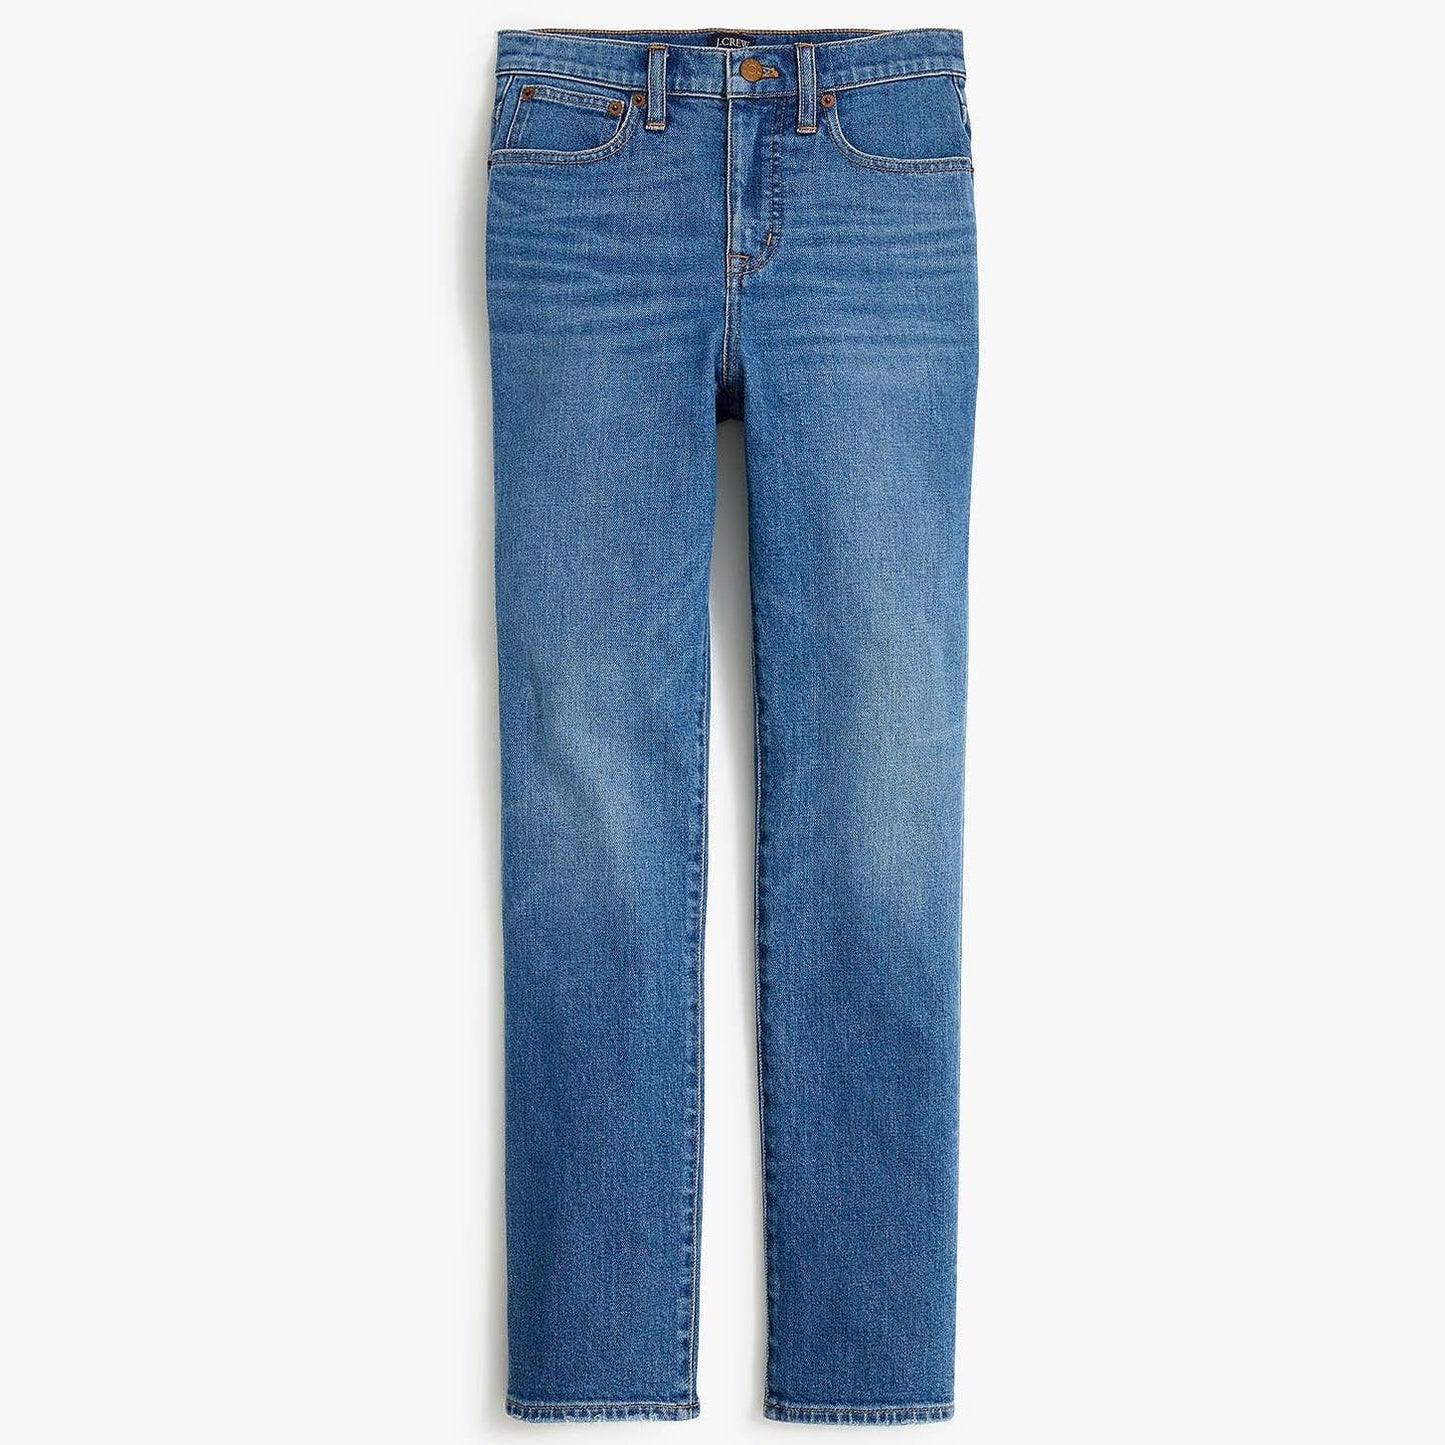 J. Crew Essential All-Day Stretch Pull On High Waisted Straight Jeans Blue 33